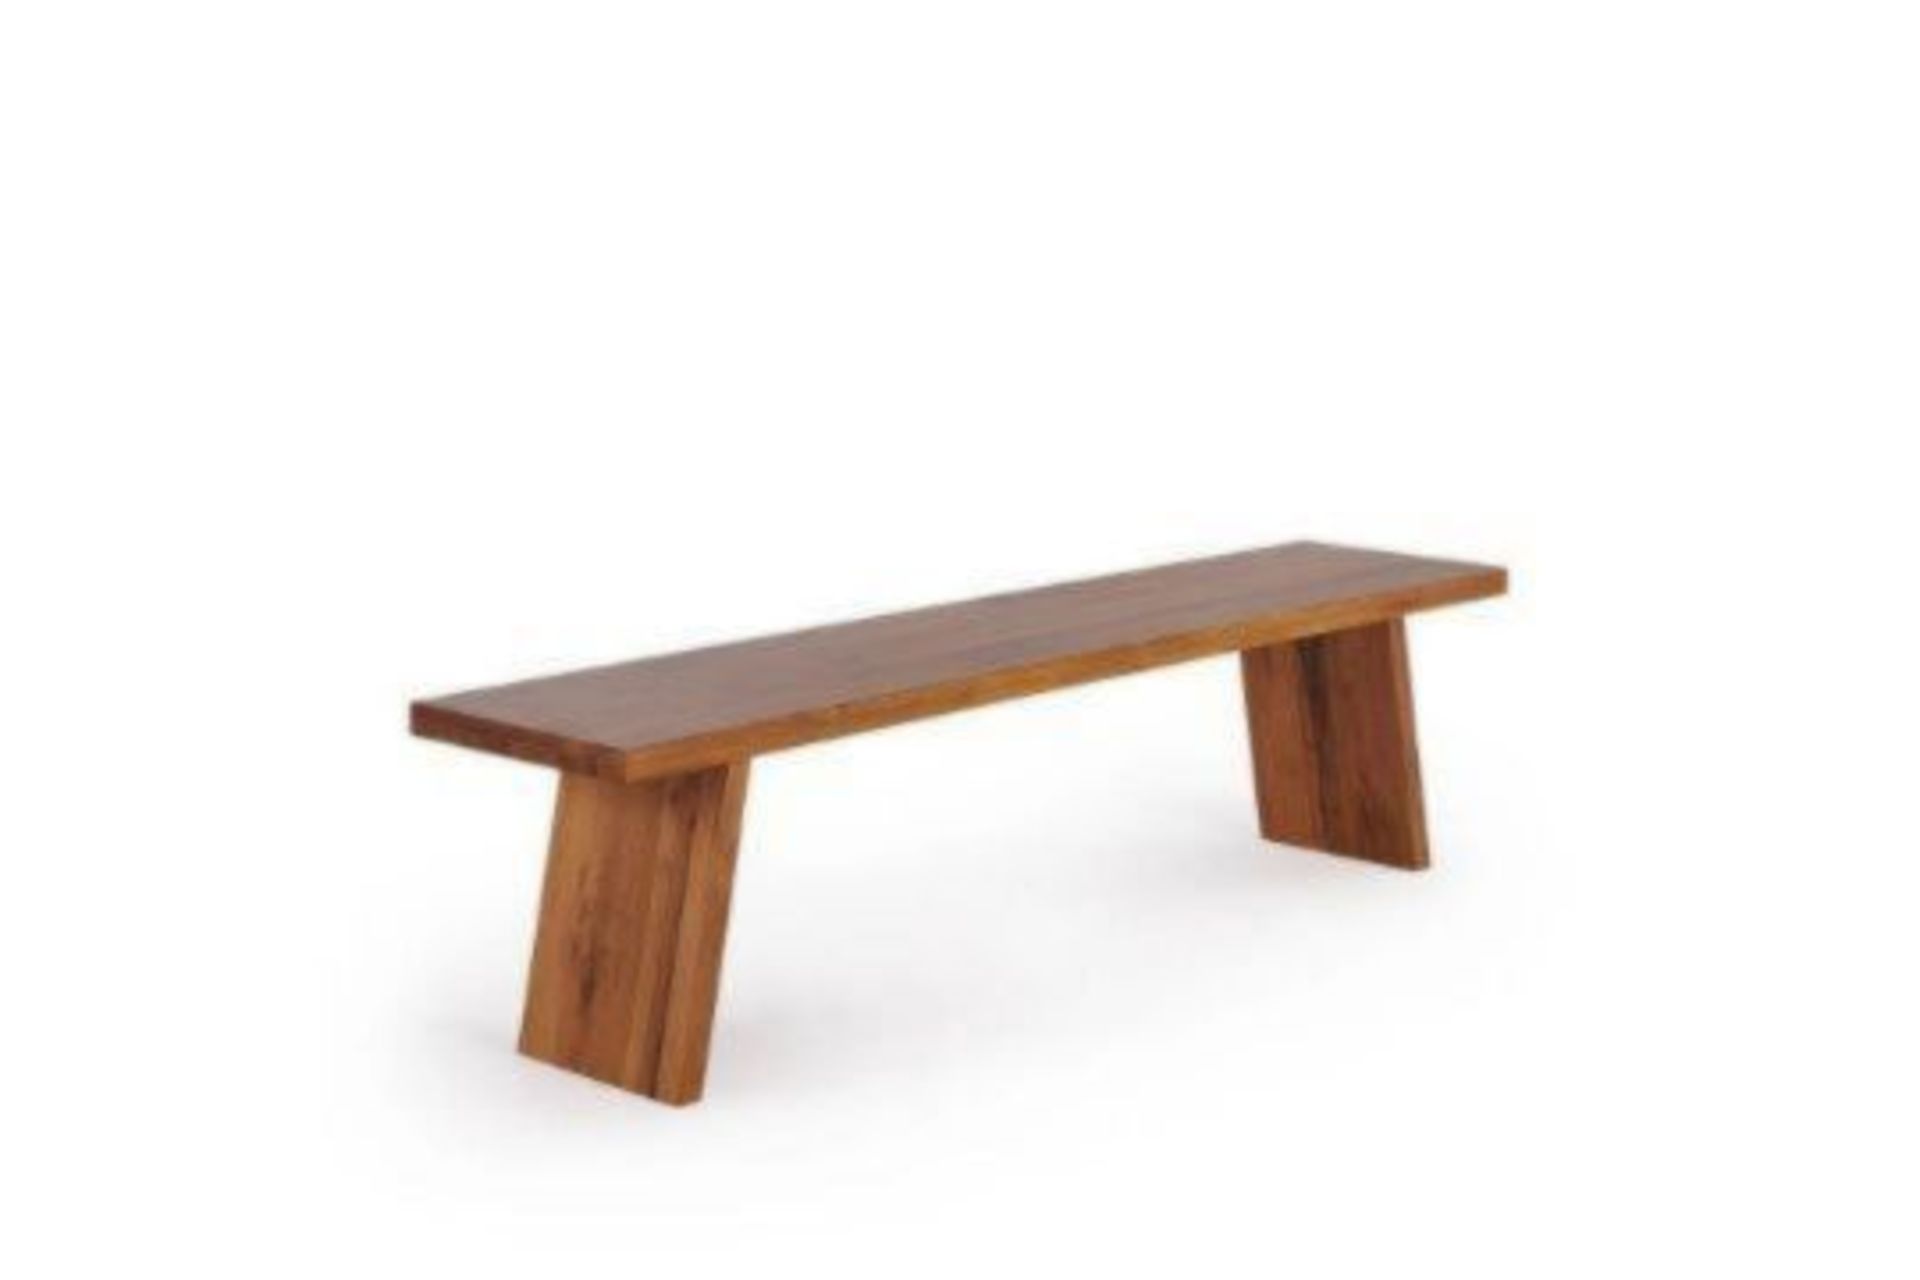 4 X New Boxed - Cantilever Rustic Solid Oak Bench. 180cm Long. RRP £330 EACH, GIVING THIS LOT A